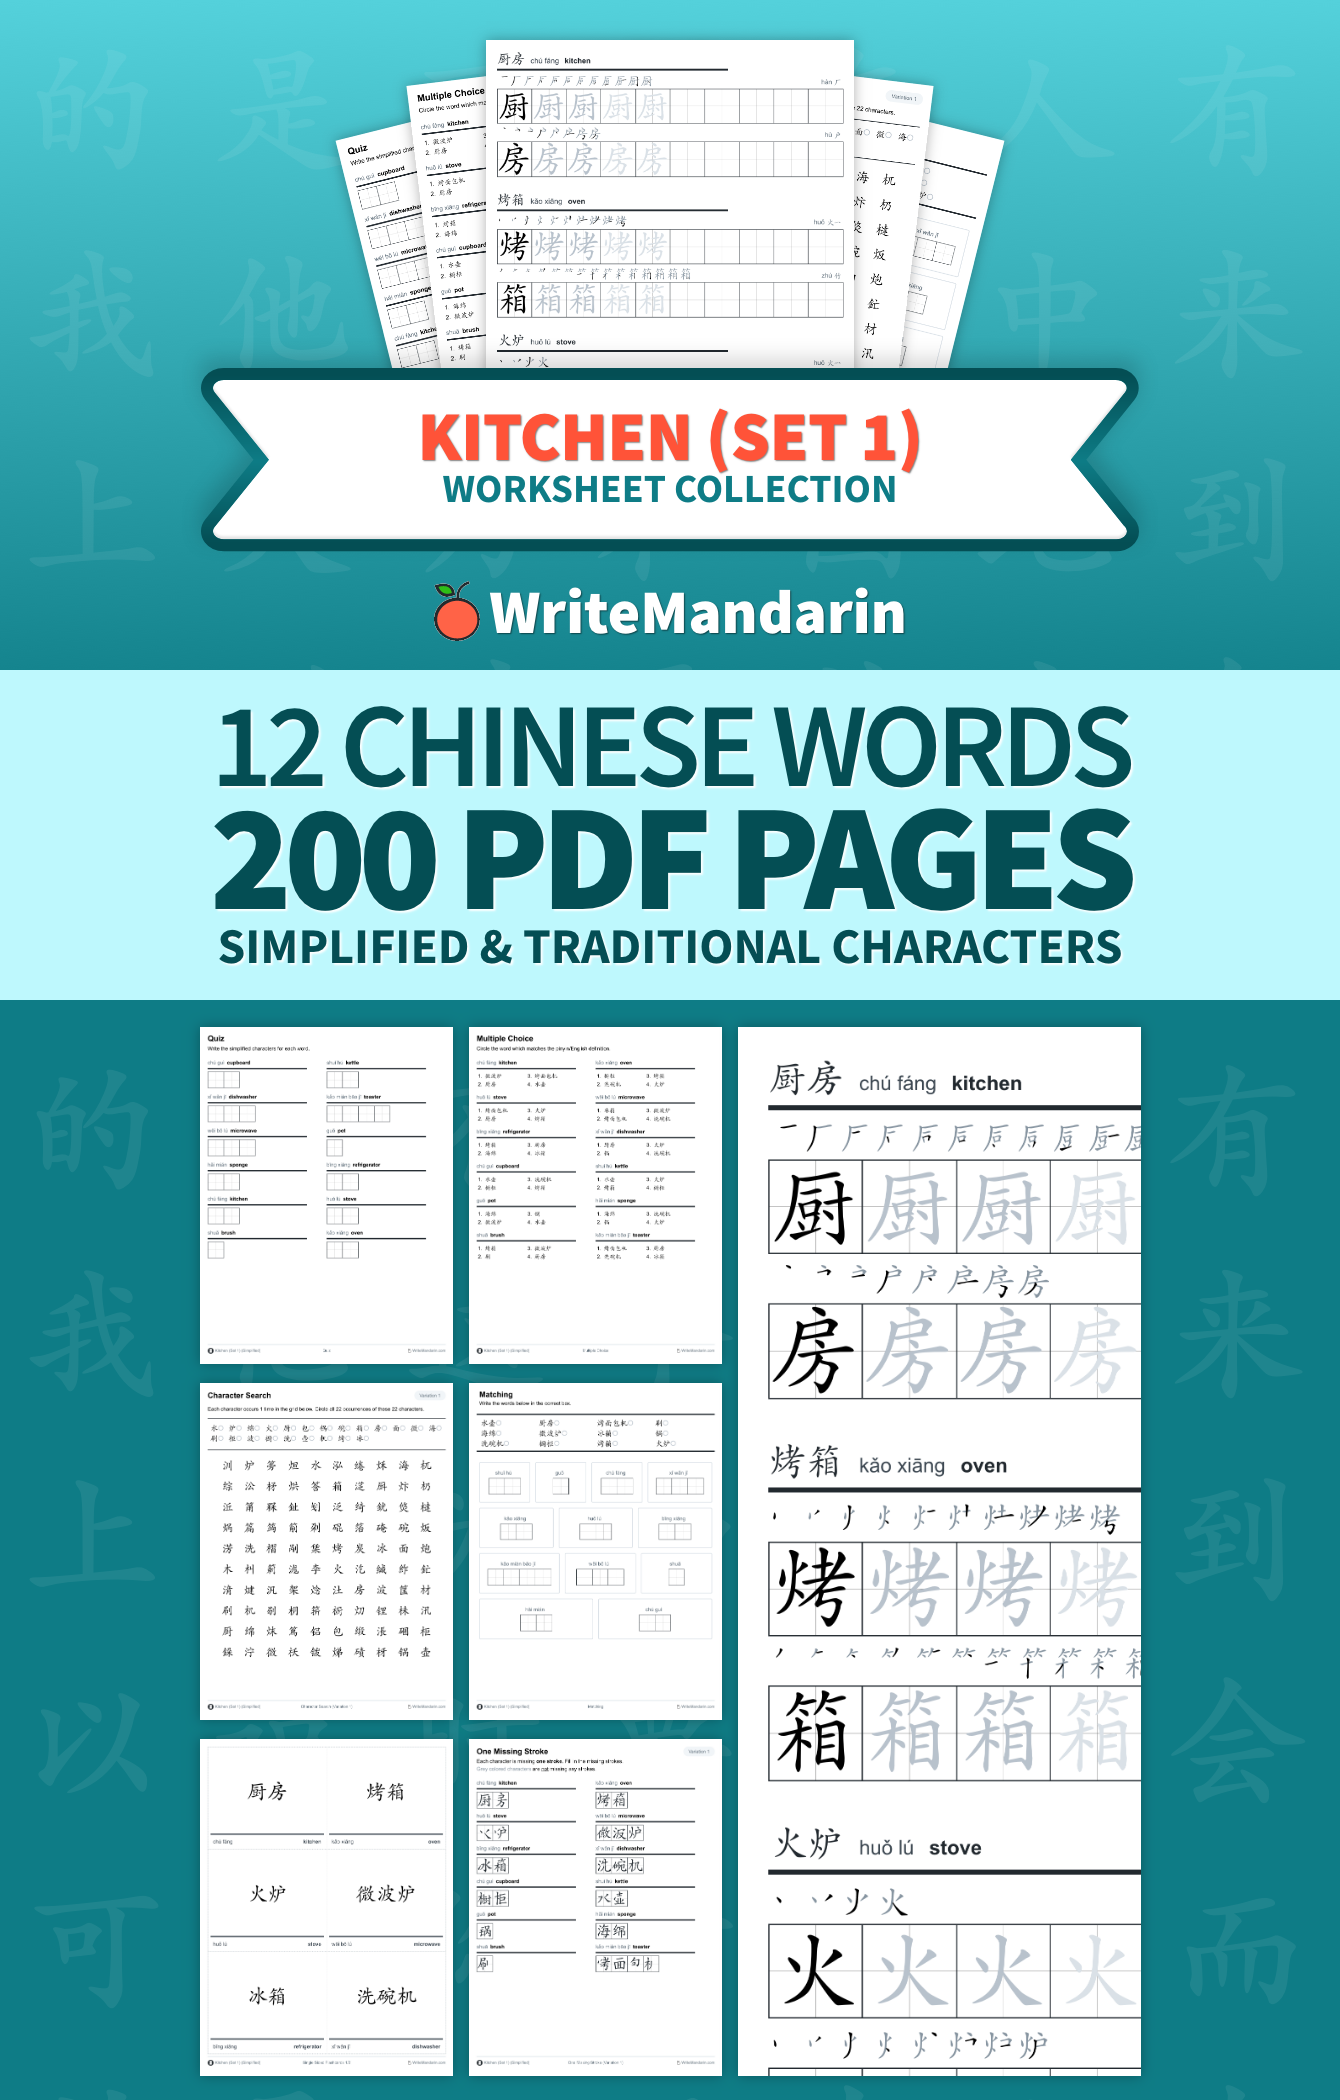 Preview image of Kitchen (Set 1) worksheet collection